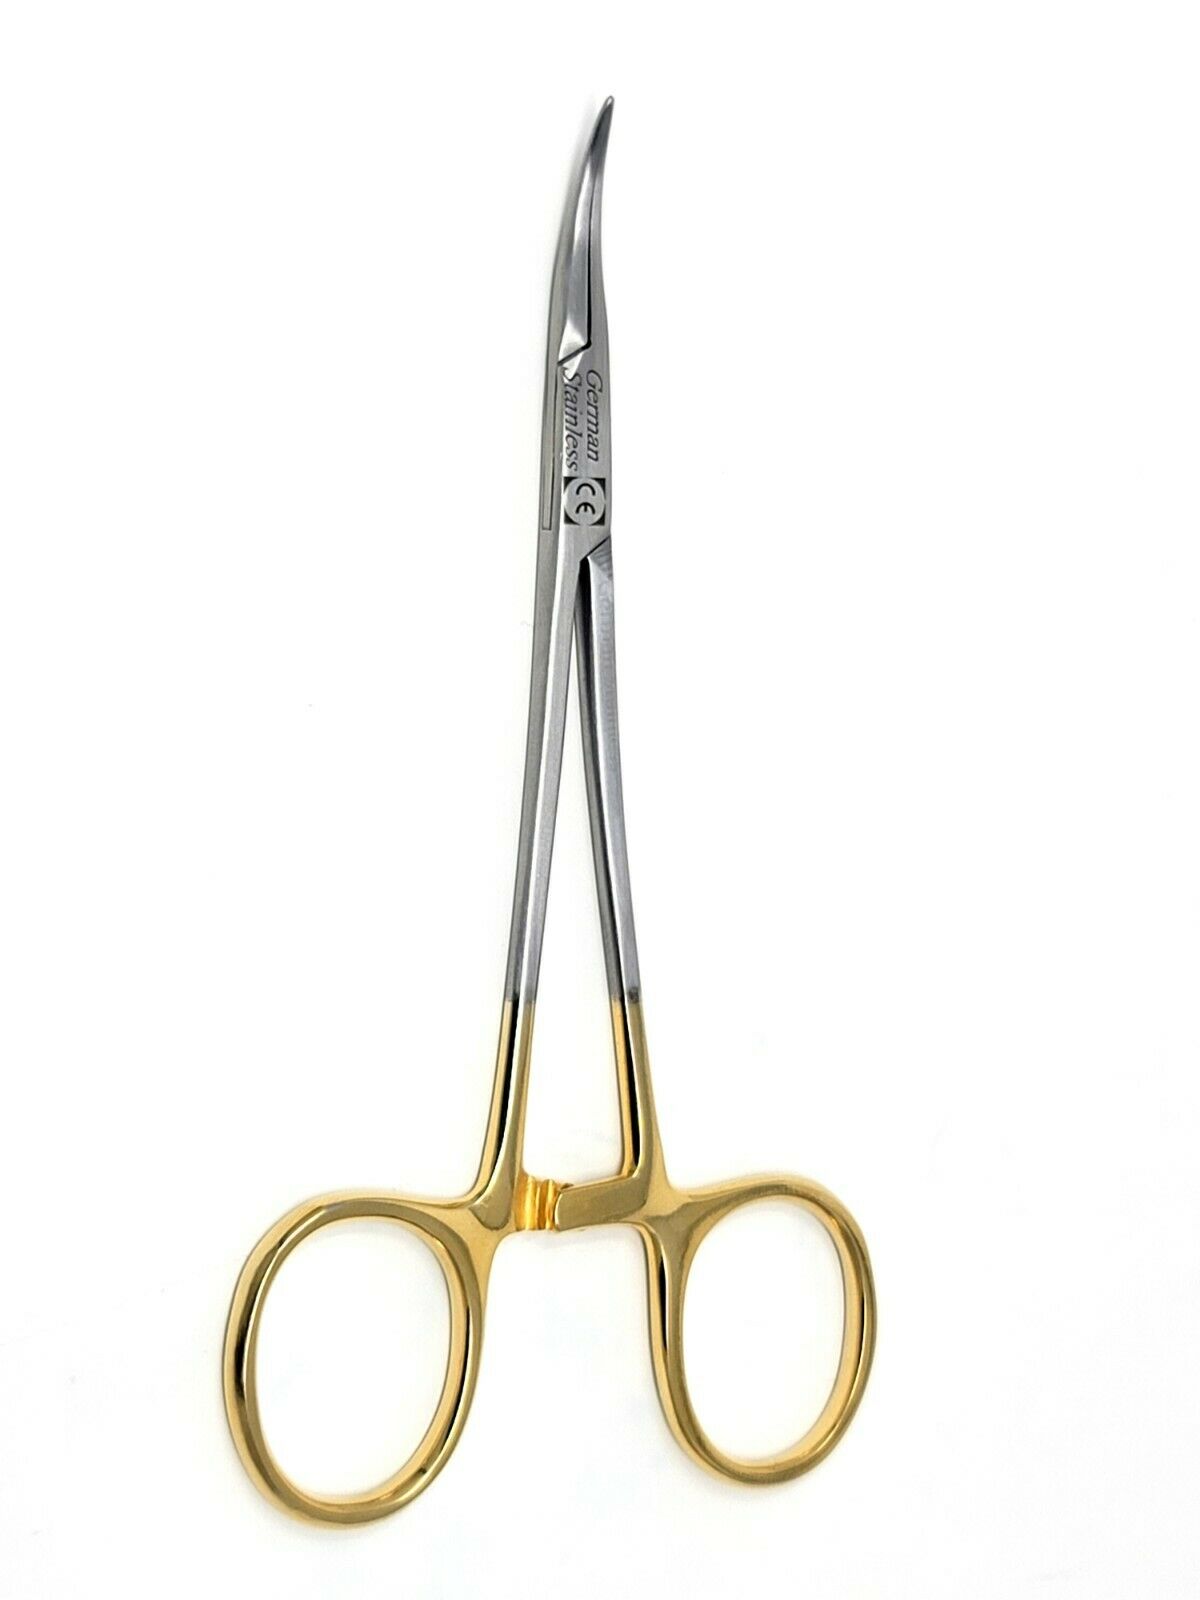 Sutureless Vasectomy Surgery Forceps 5" Curved Fine Point